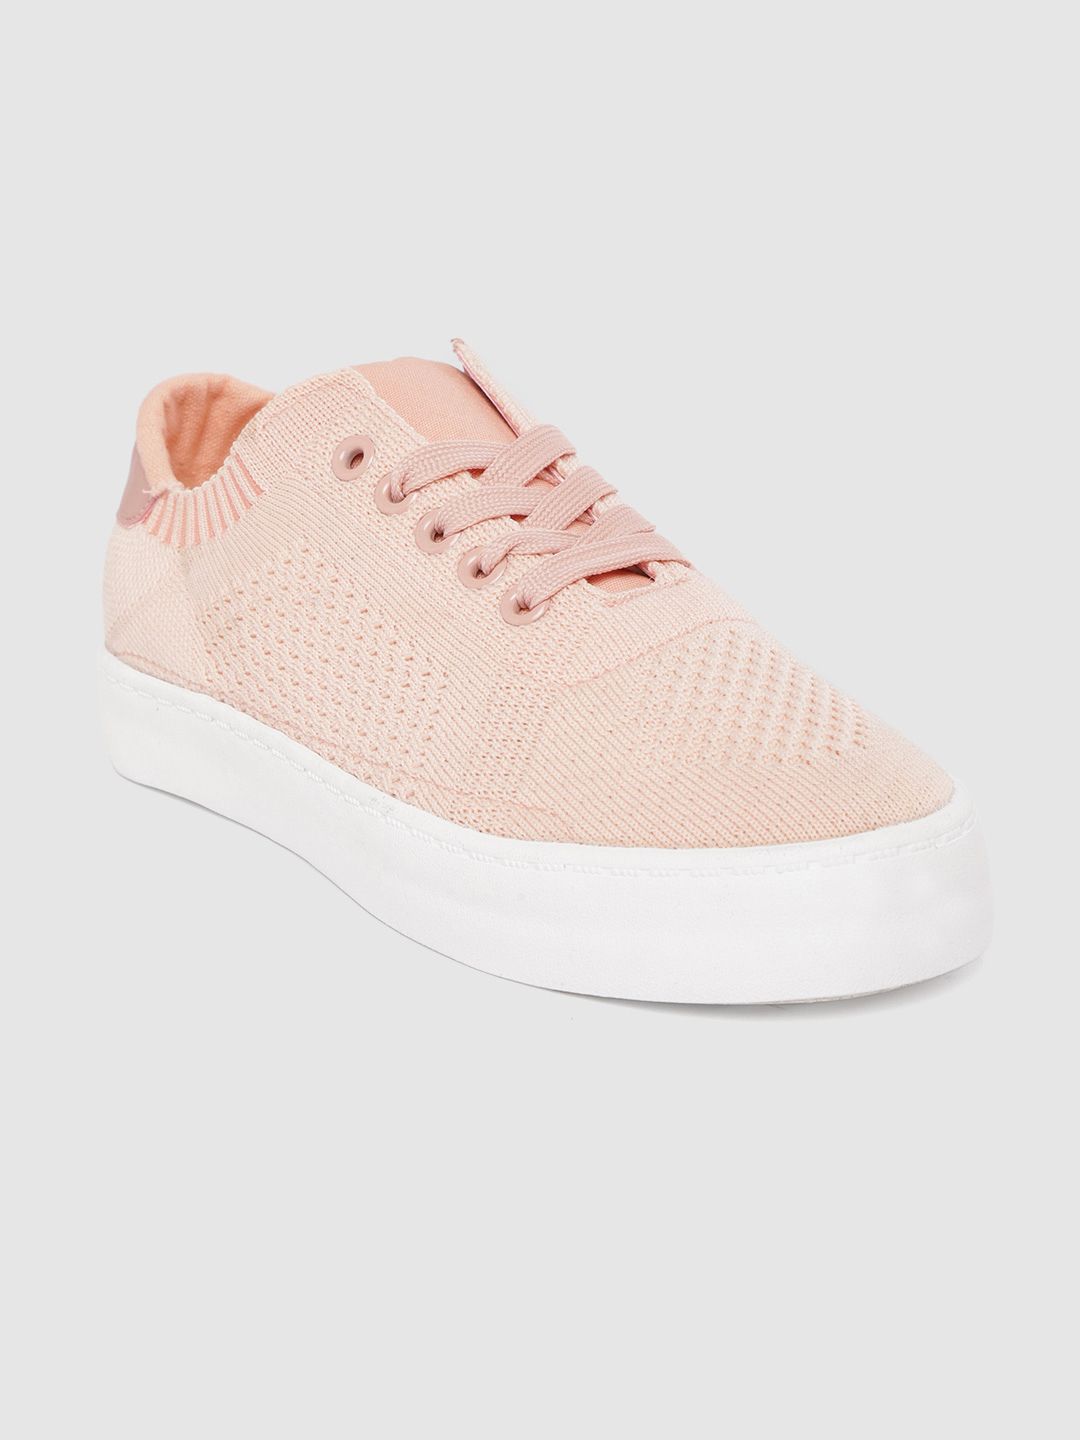 Allen Solly Women Peach-Coloured Sneakers Price in India